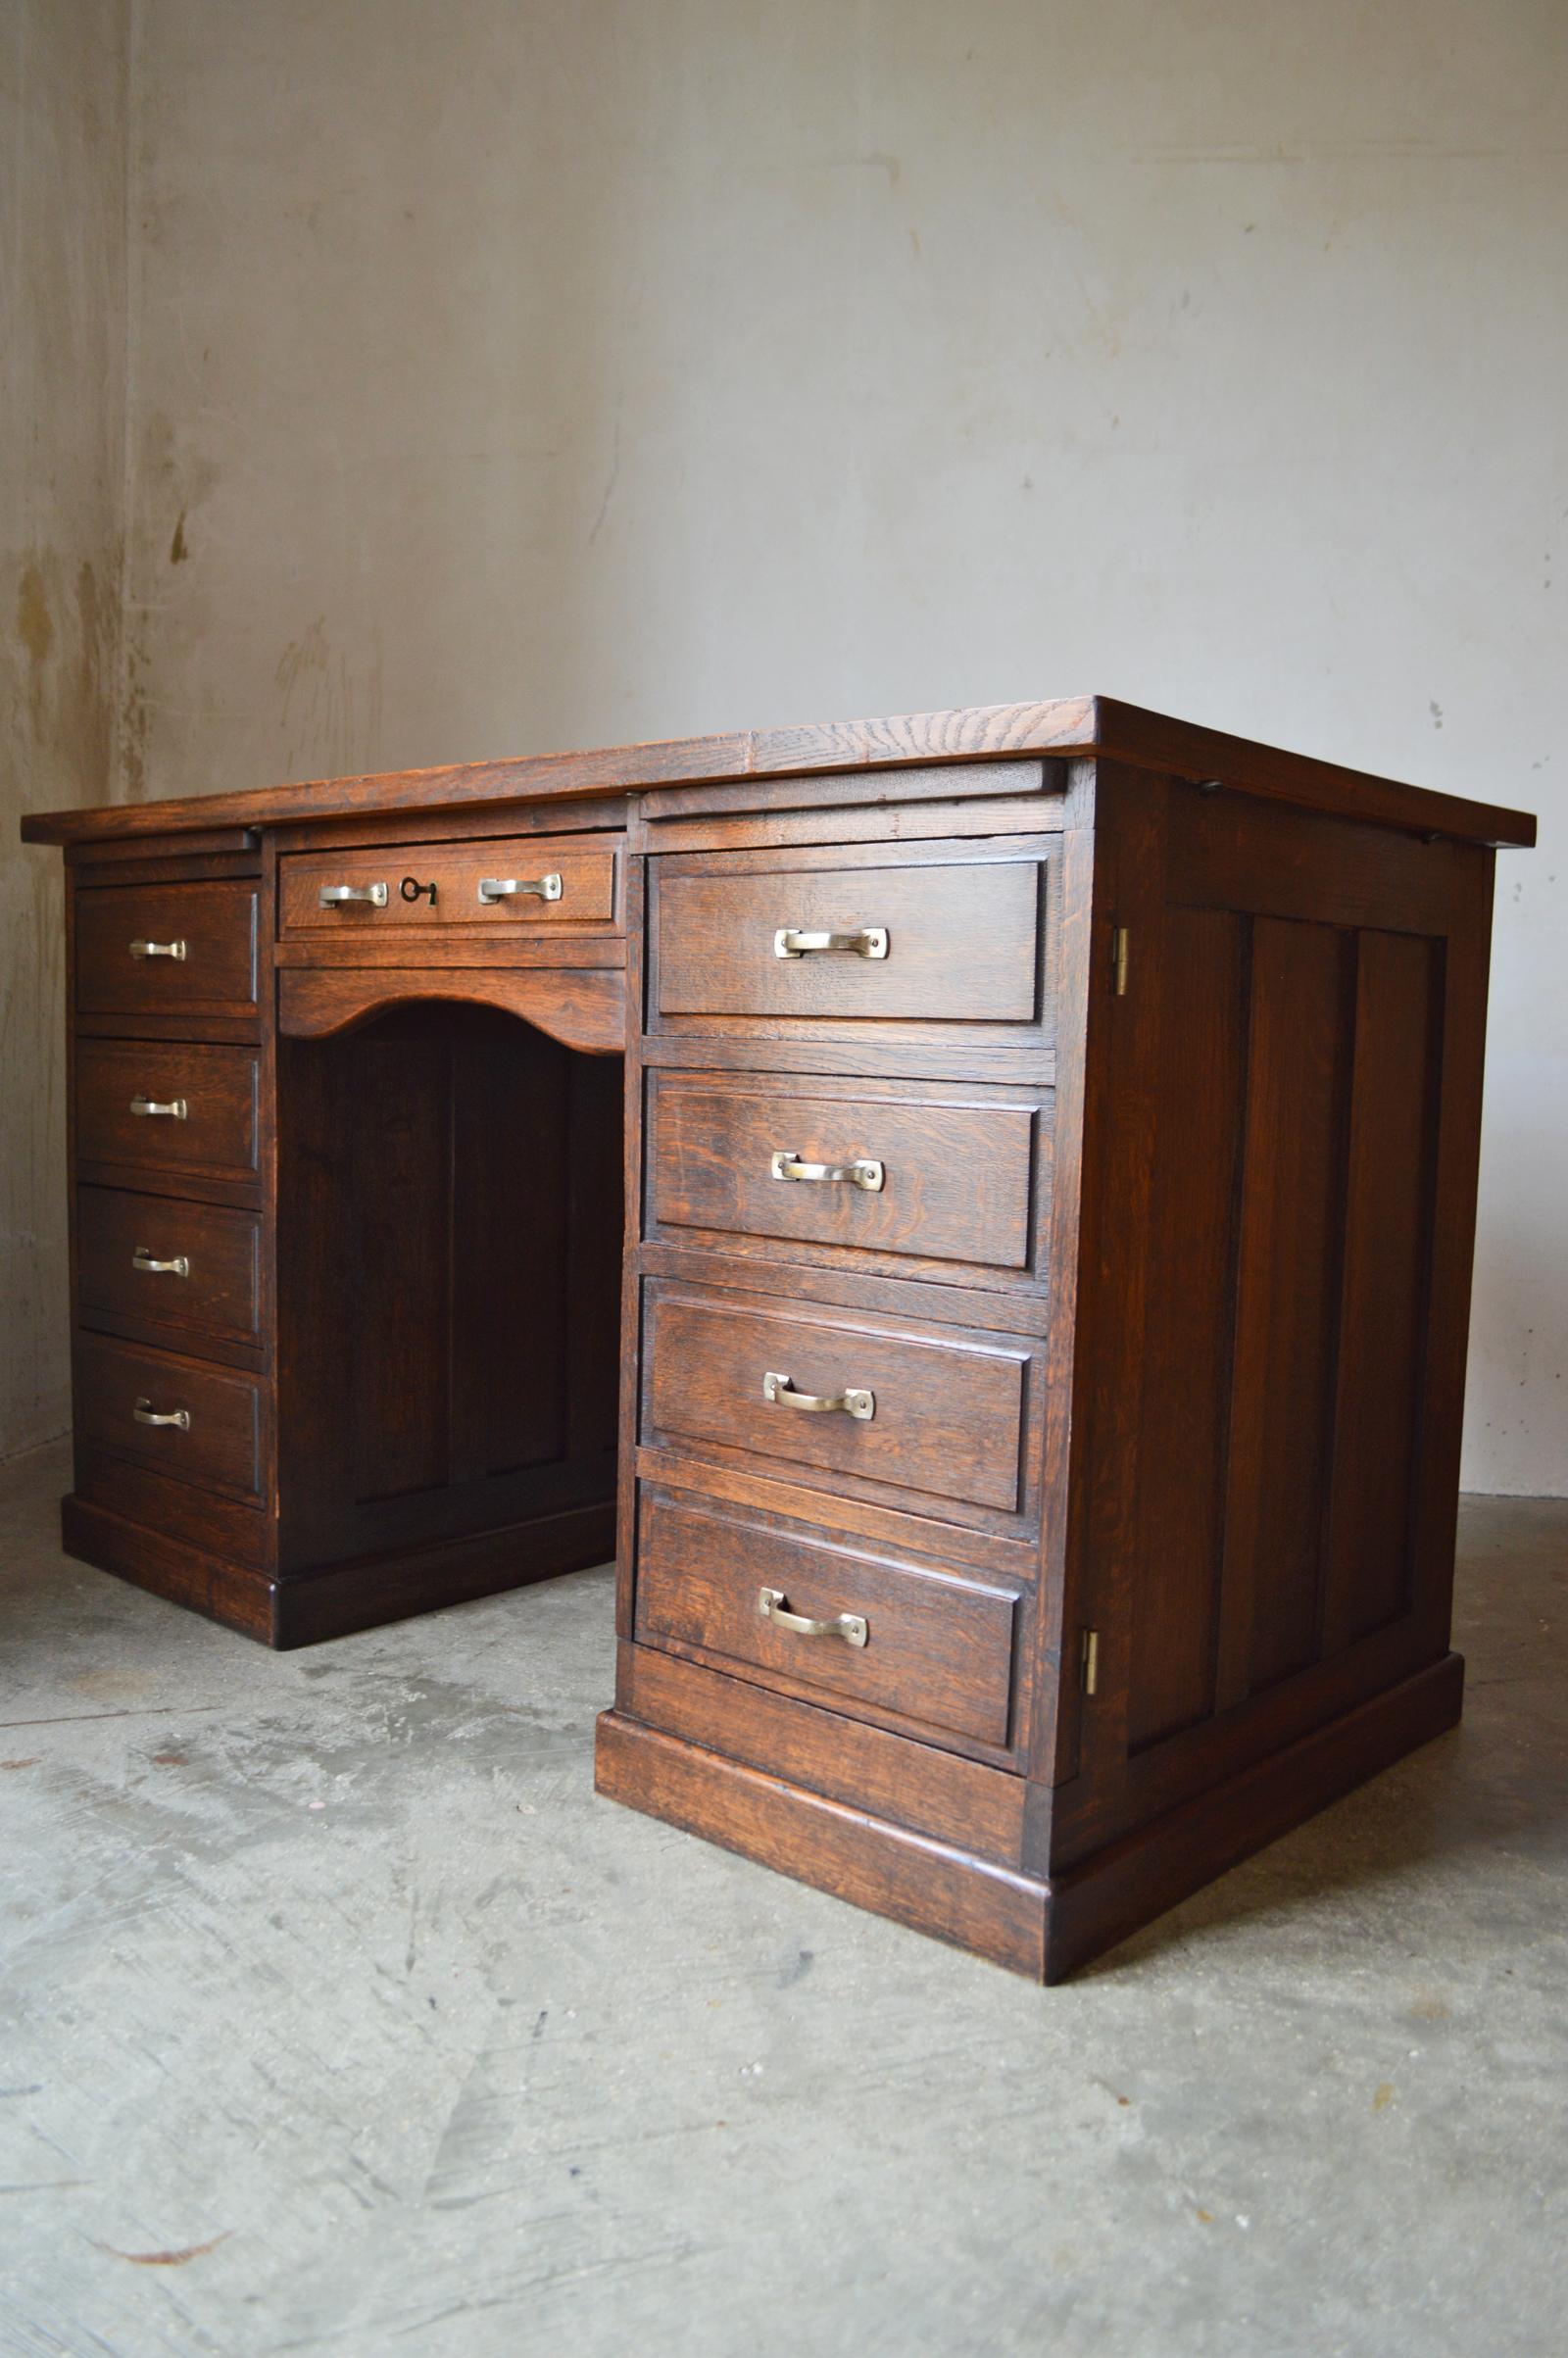 It's a wonderful desk, really original, full of fun details.

Composed of 5 drawers and 1 cupboard.
The box on the left contains 4 drawers. 
The box on the right also seems to contain 4 drawers, but in reality it's a 